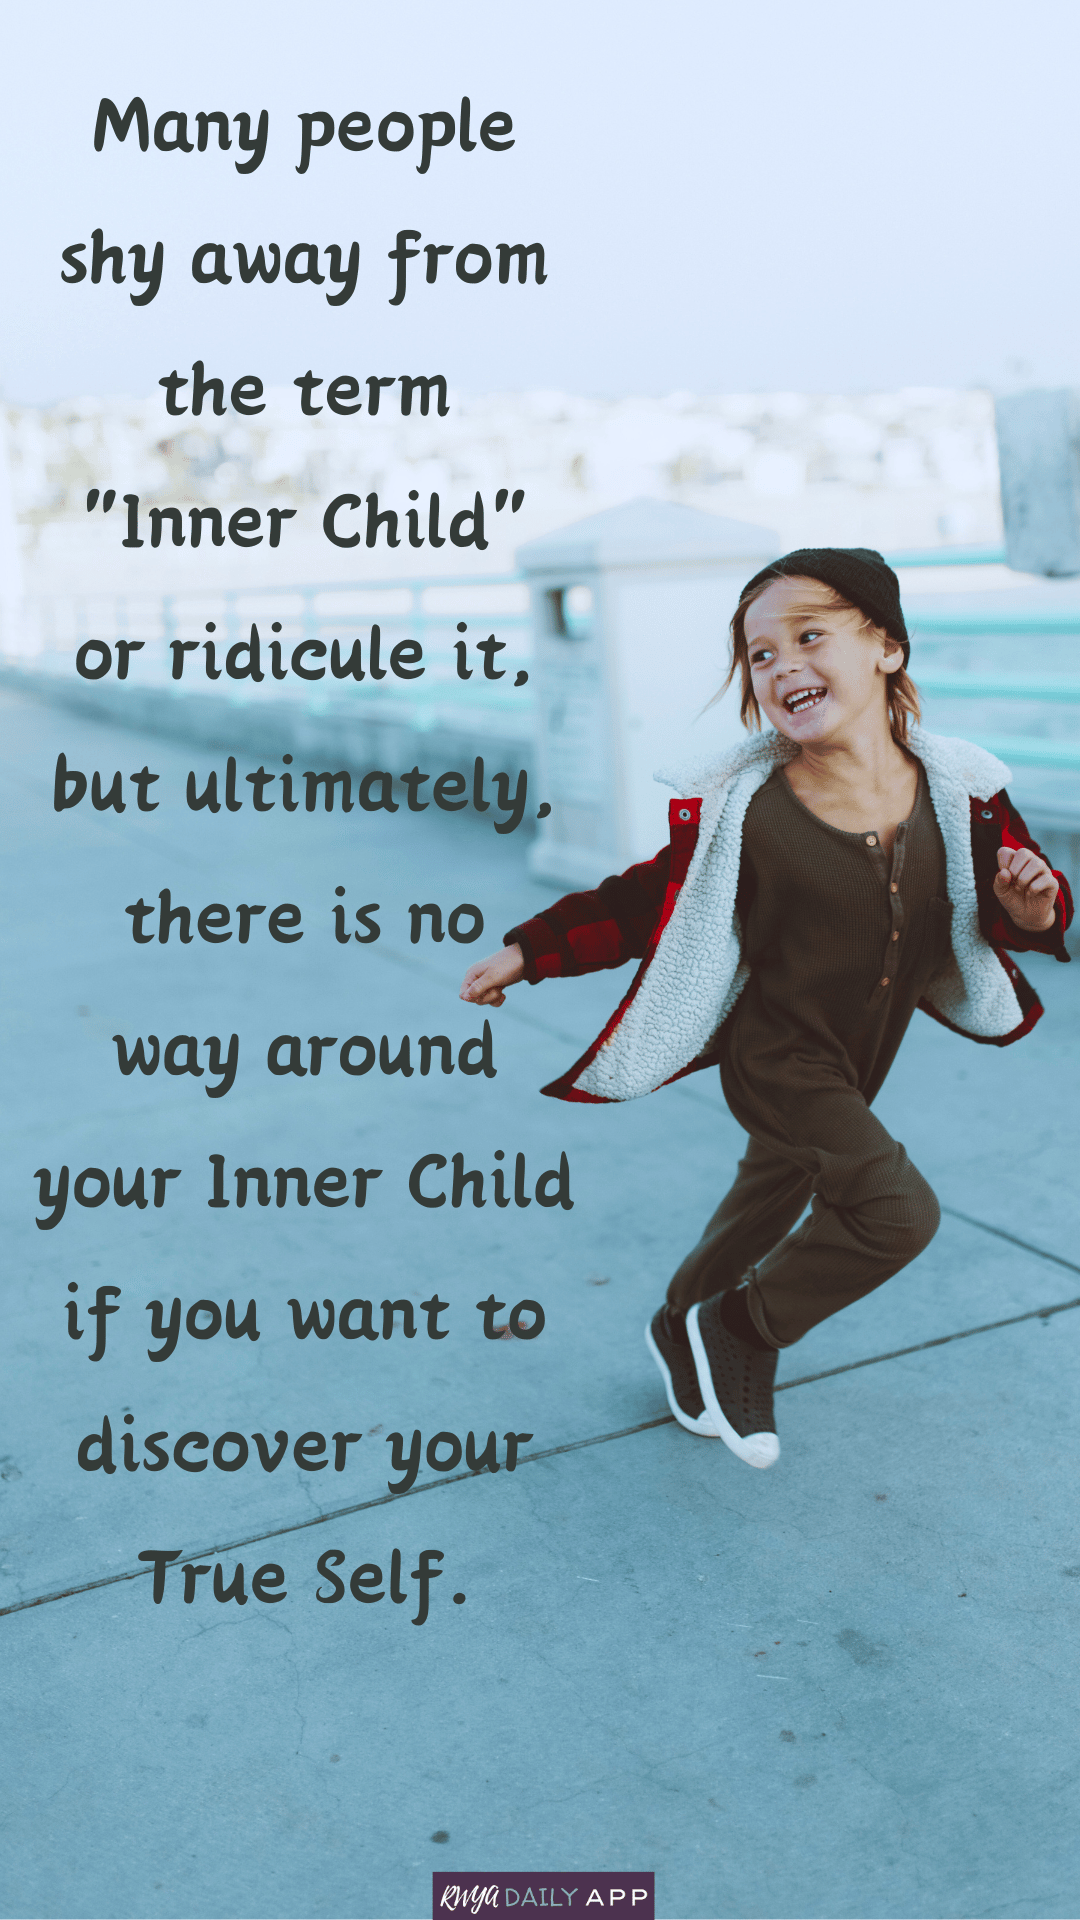 Many people shy away from the term Inner Child or ridicule it, but ultimately, there is no way around your Inner Child if you want to discover your True Self.